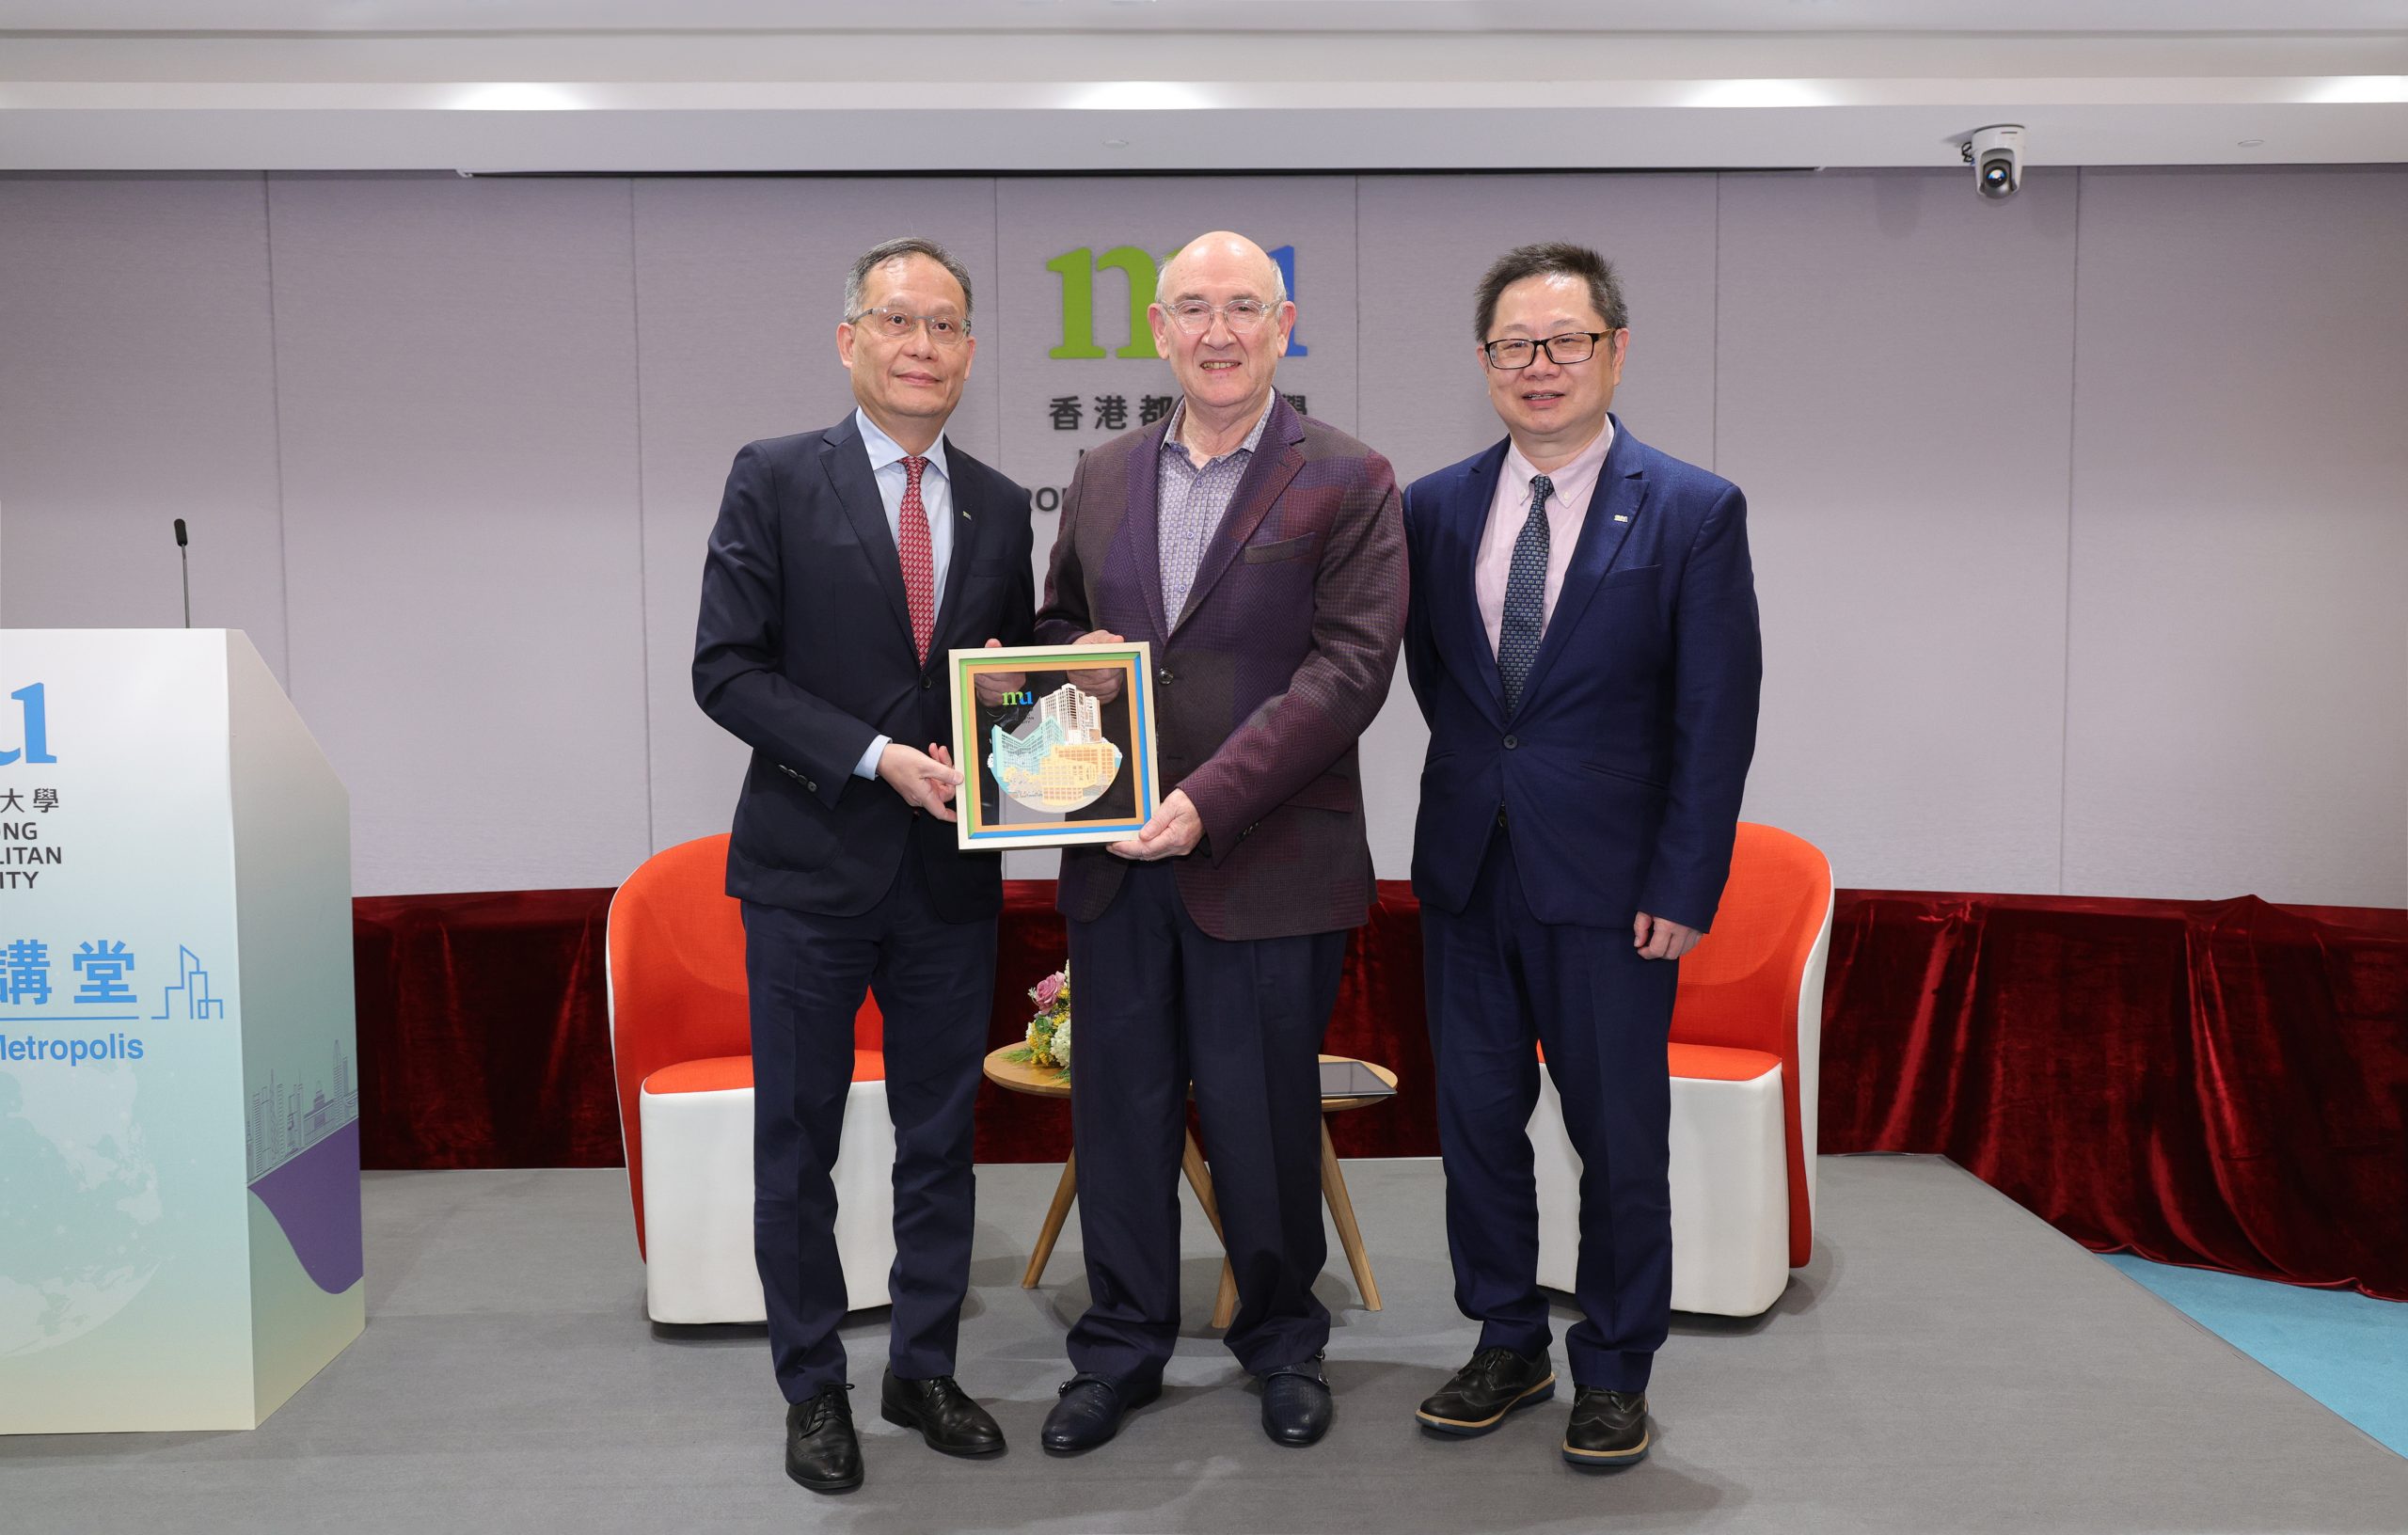 HKMU President Prof. Paul Lam Kwan-sing (left) and Provost Prof. Reggie Kwan Ching-ping (right) present a souvenir to HKBU Chair Professor Prof. Jeffrey Shaw (middle).